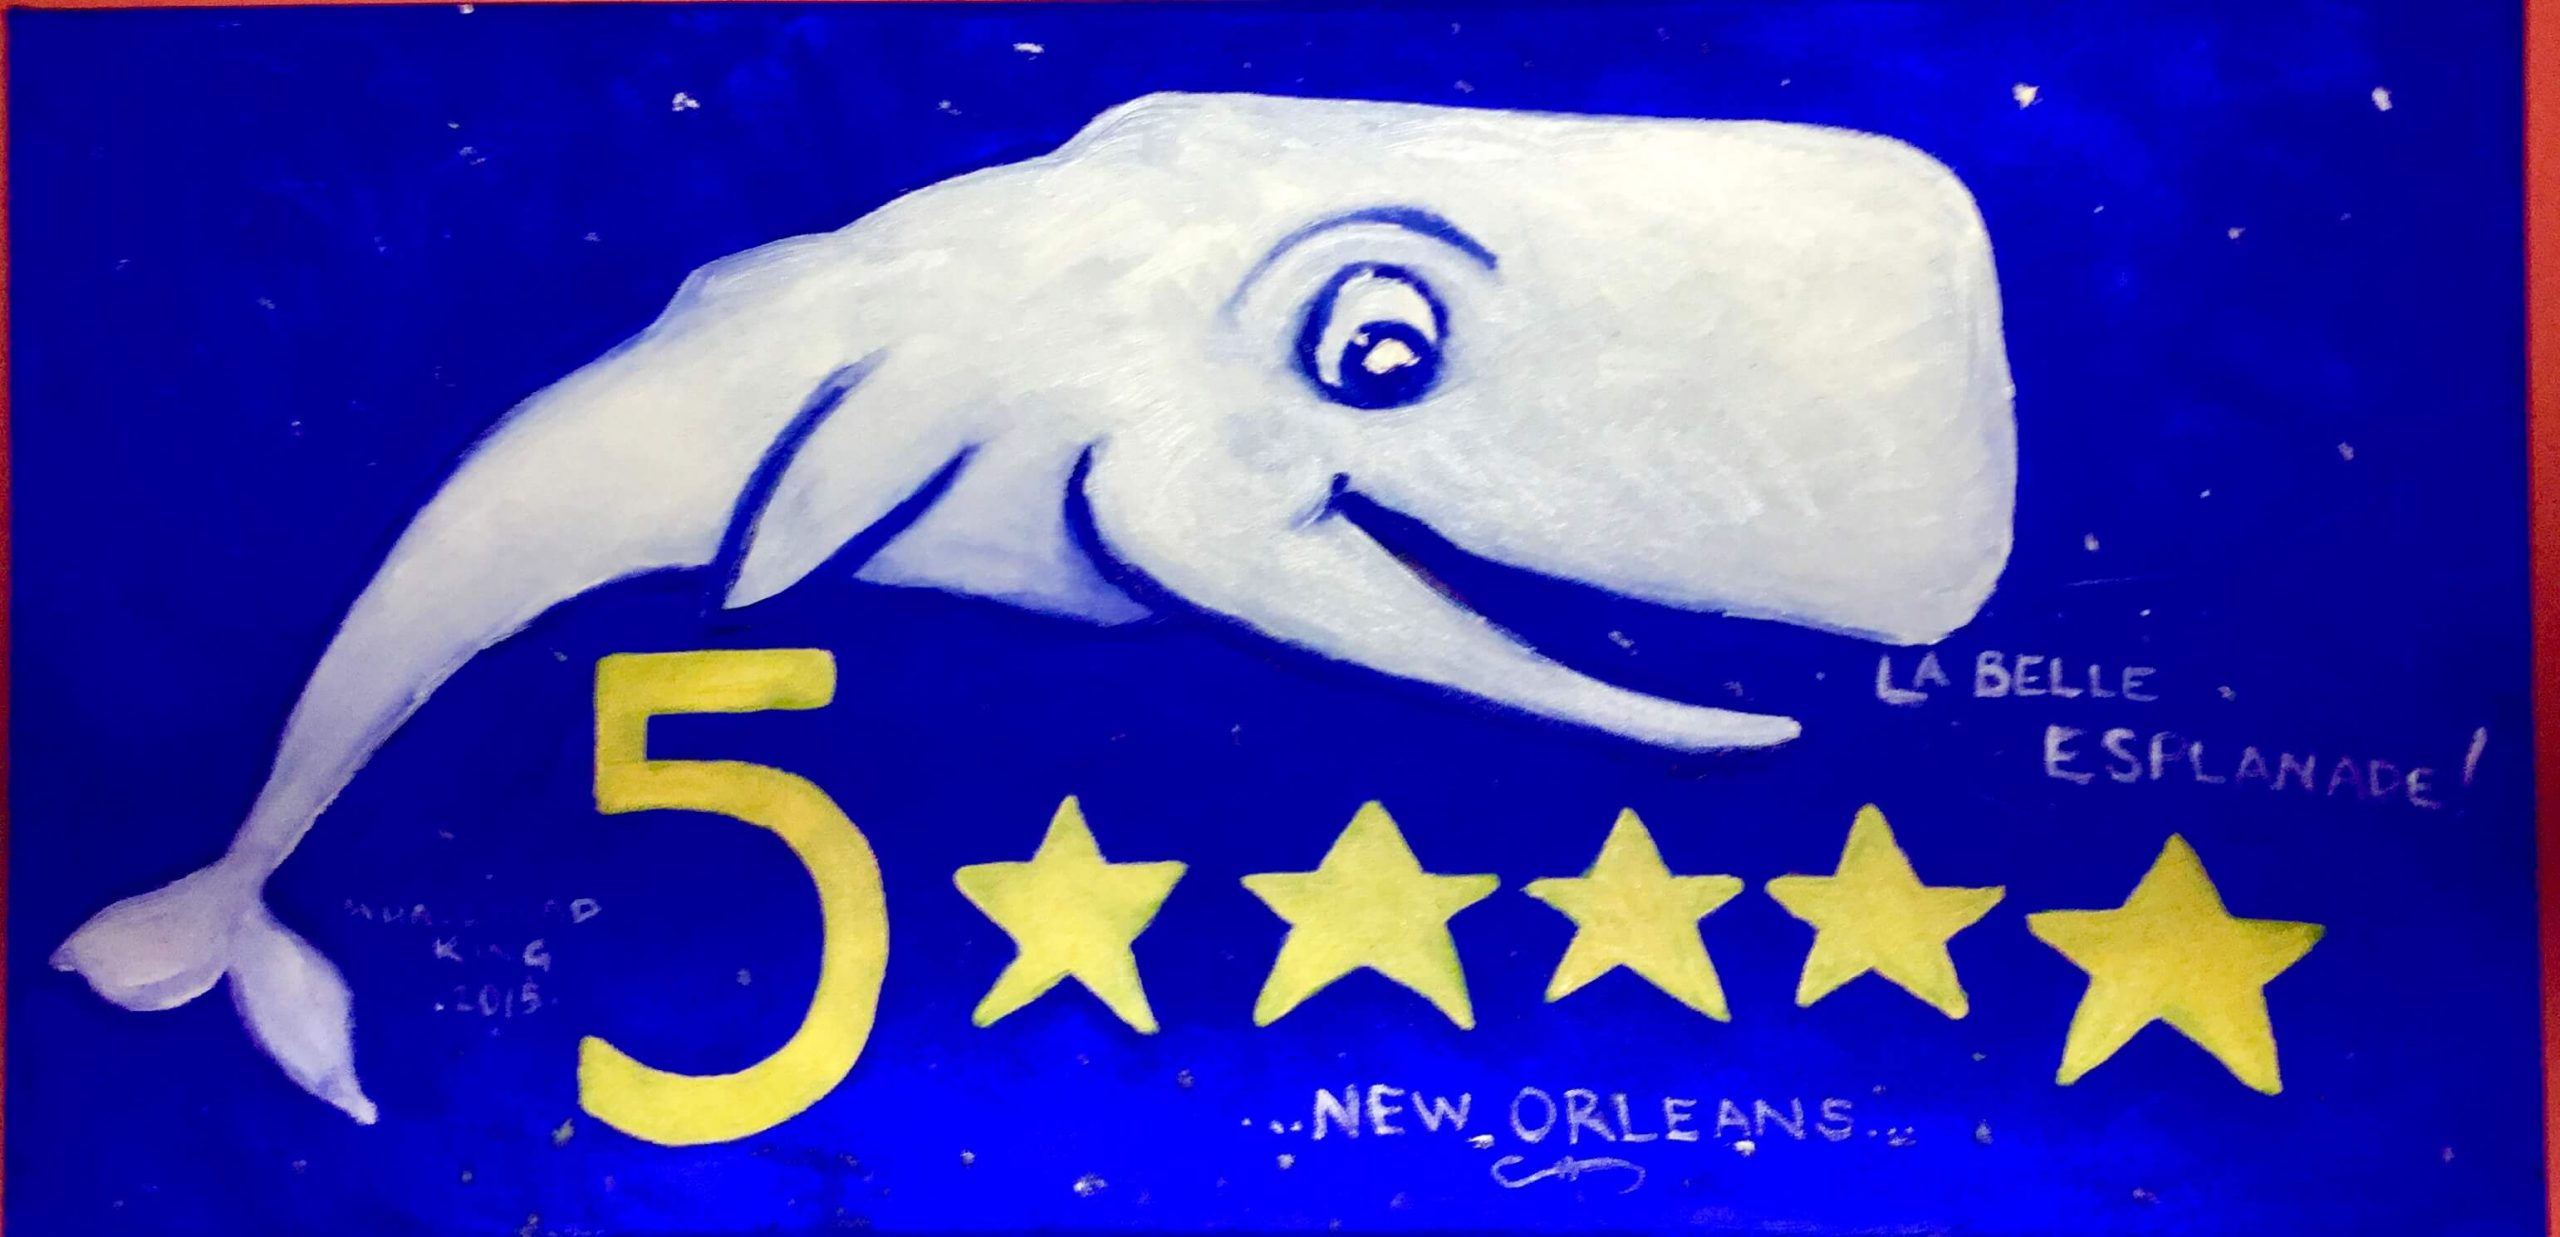 Yippee the Whale loves New Orleans